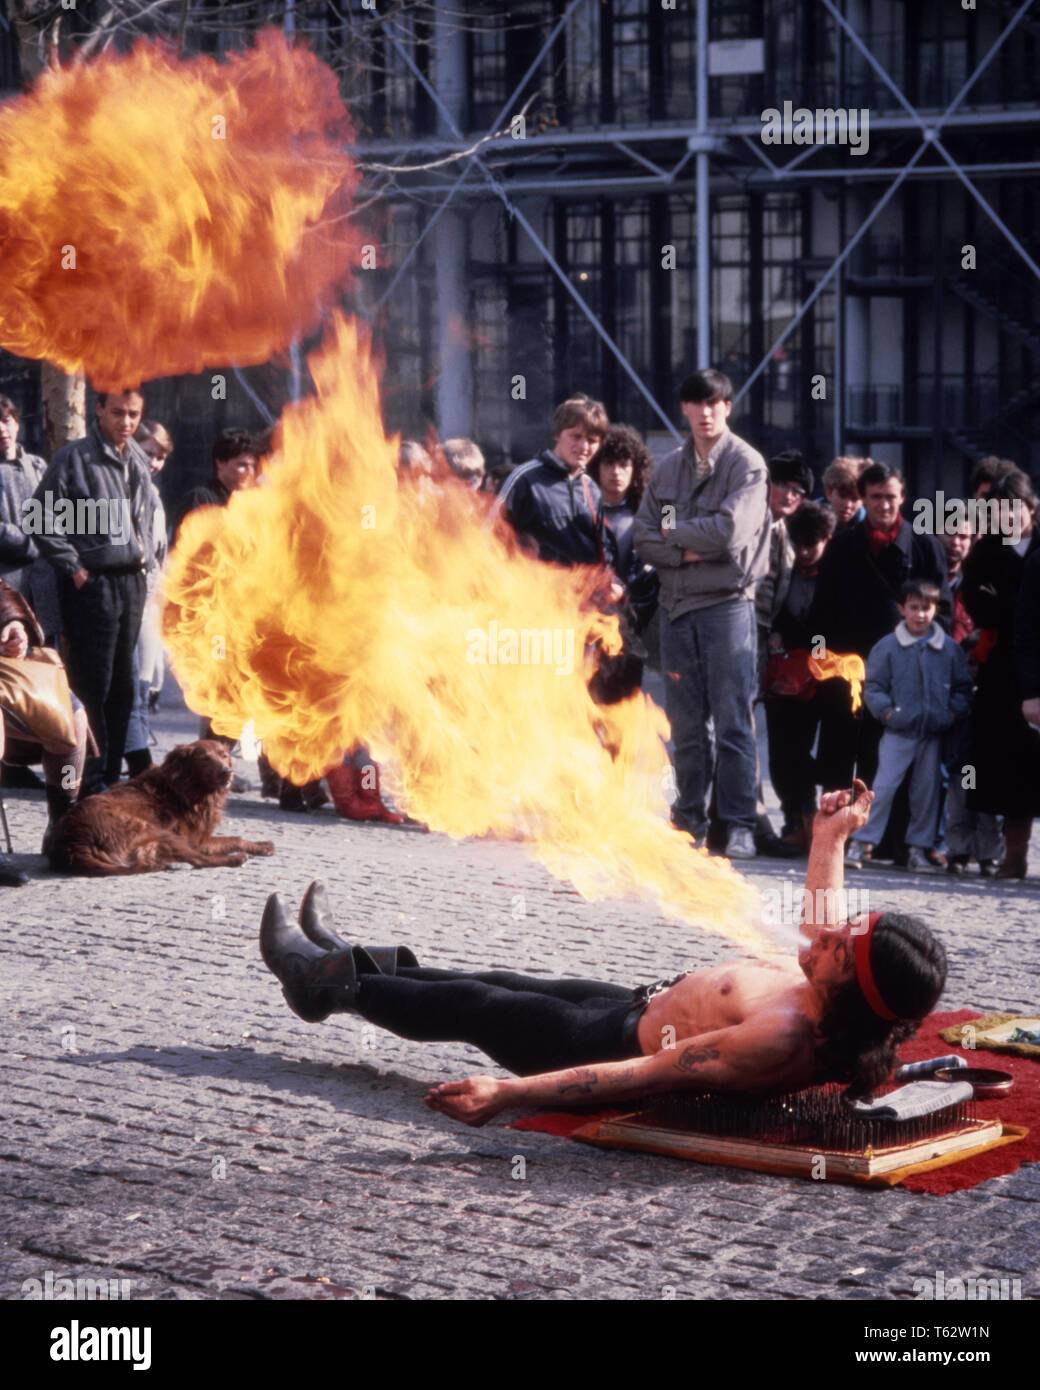 1980s FIRE BREATHER STREET PERFORMANCE ARTIST PARIS FRANCE - kc10630 PHT001 HARS RISK ARTIST PERFORMANCE PROFESSION ENTERTAINMENT SPIRITUALITY CONFIDENCE PERFORMING PERFORMING ARTS SKILL OCCUPATION SKILLS ADVENTURE PERFORMER STRENGTH COURAGE CAREERS EXCITEMENT POWERFUL ENTERTAINER OCCUPATIONS PLACES MOTION BLUR CONCEPTUAL ACTORS STYLISH EATER ENTERTAINERS FIRE BREATHING PERFORMERS YOUNG ADULT MAN CAUCASIAN ETHNICITY OLD FASHIONED Stock Photo